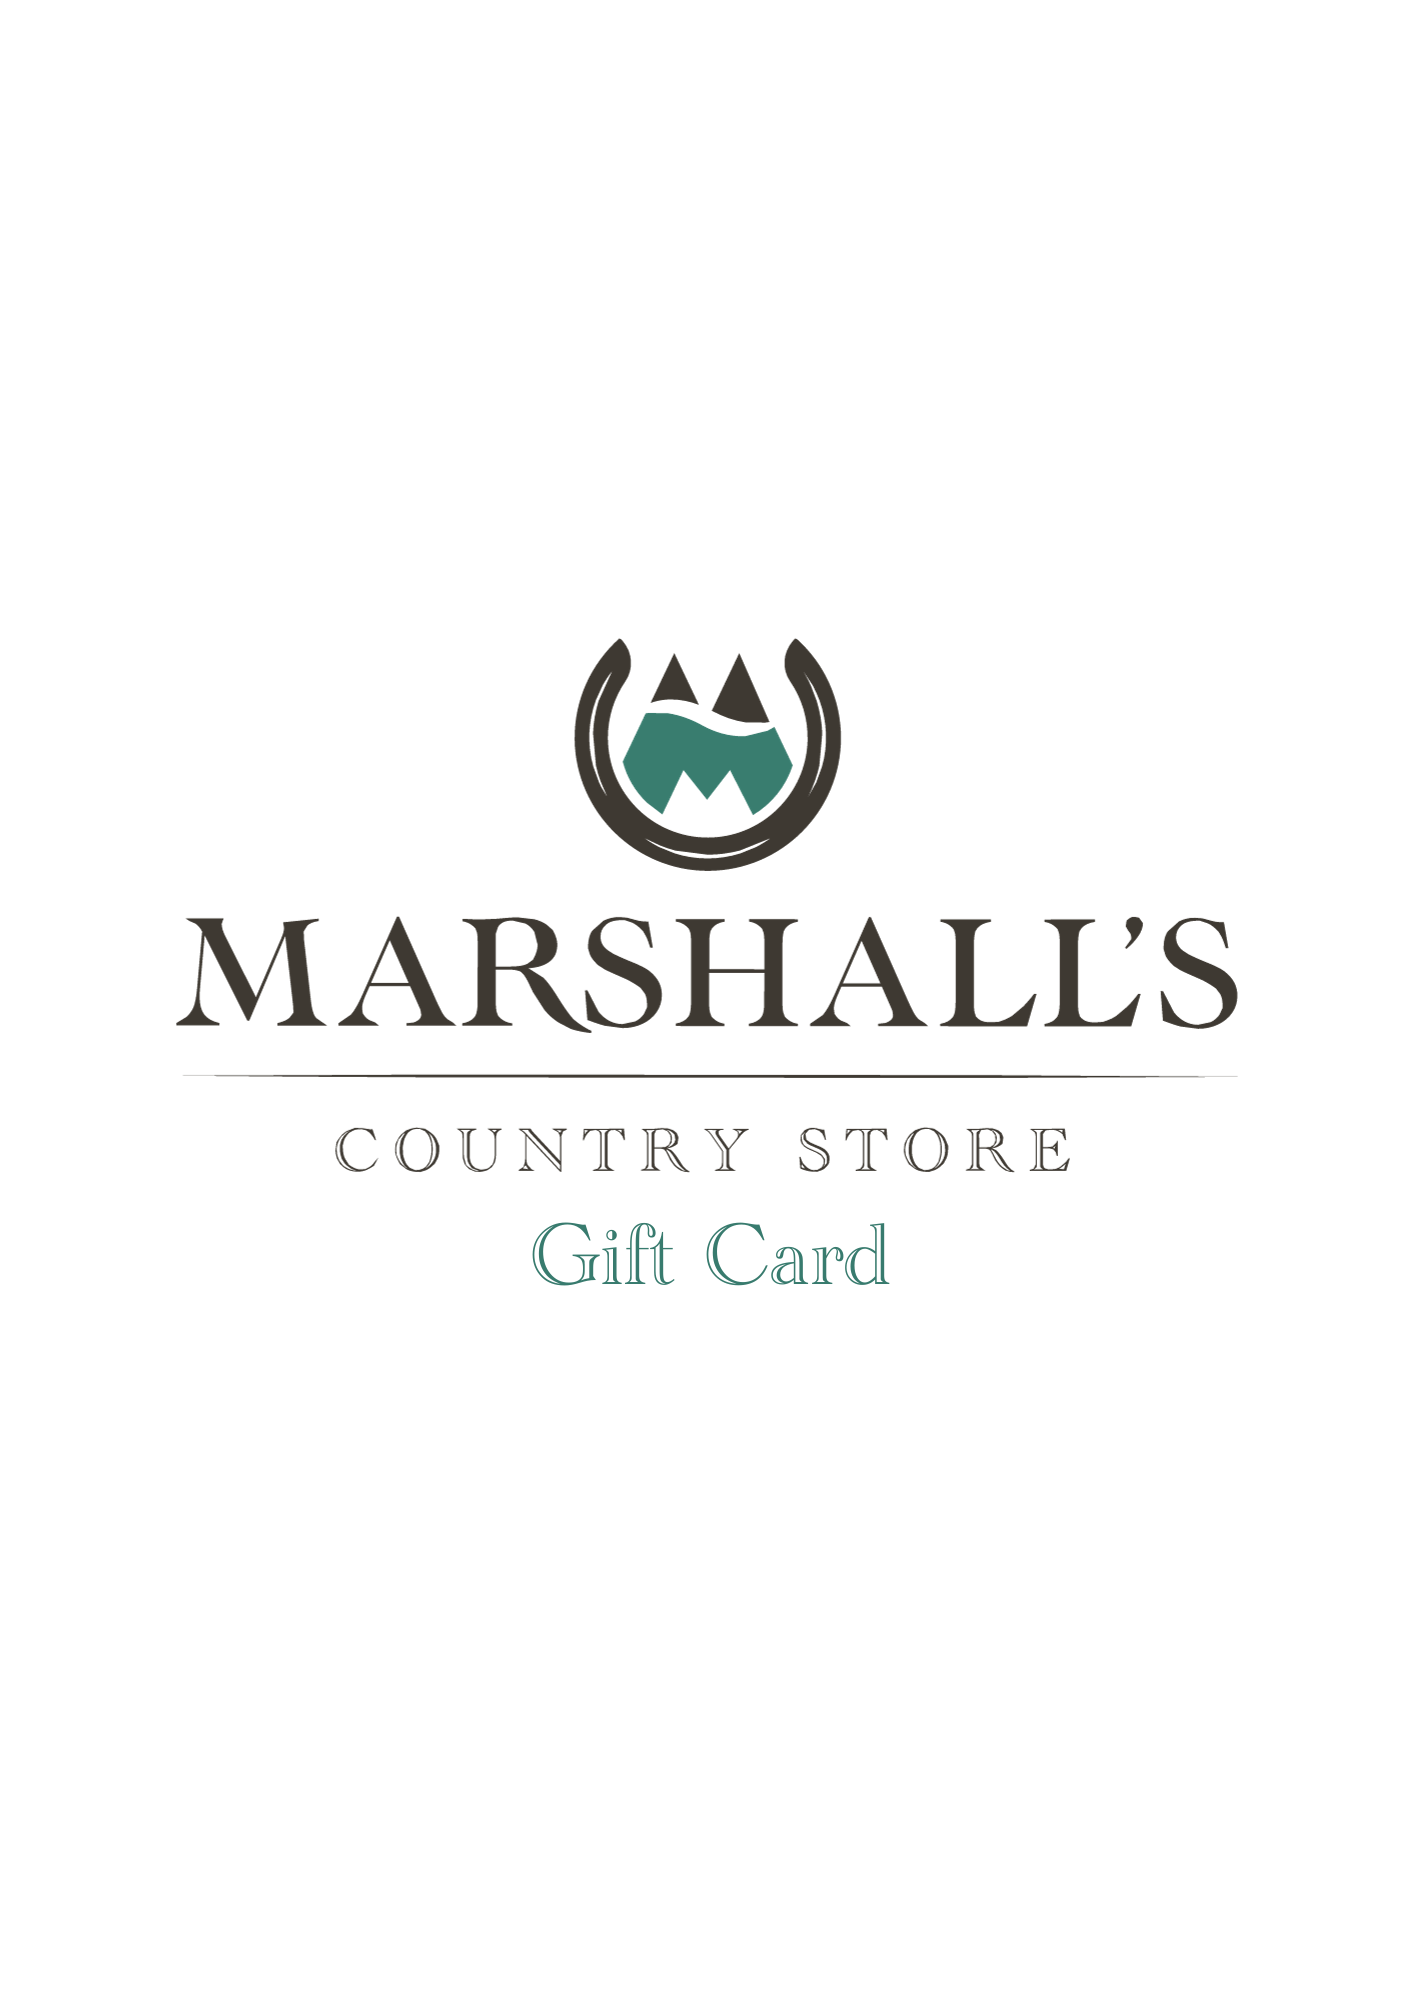 Marshalls Country Store Gift Card (Digital)